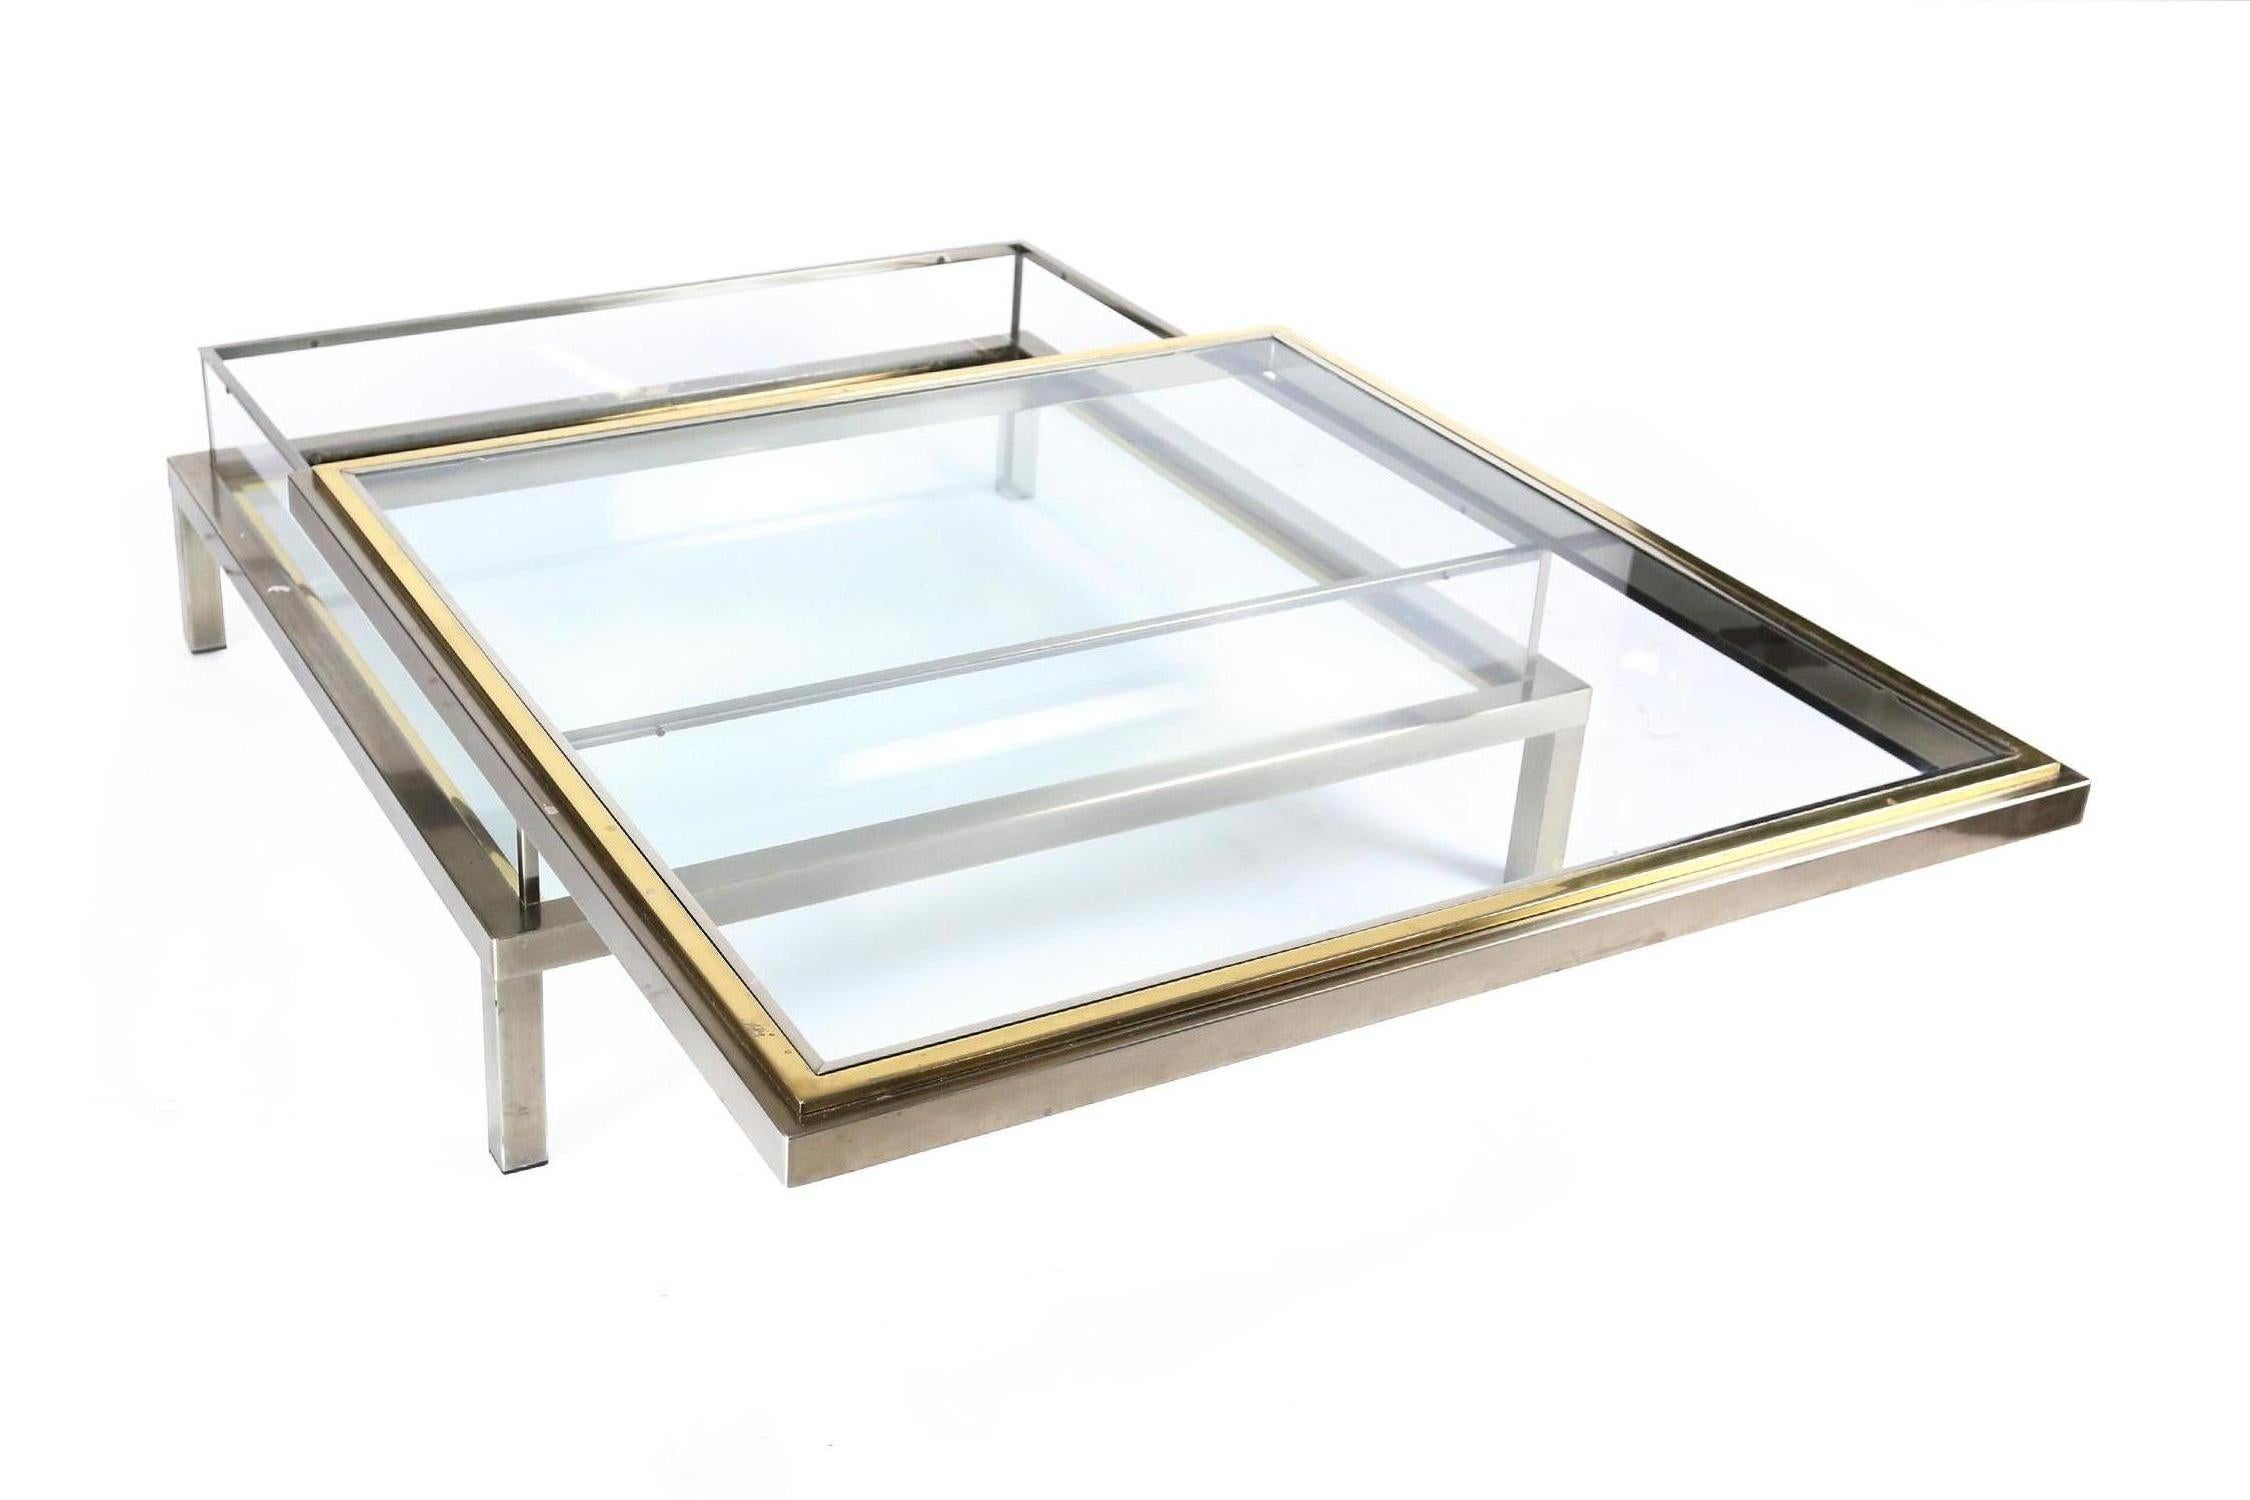 1970s coffee table in good condition.
Satined chrome and brass with glass tops 
The top can slide open to reveal the inside compartment that can be used as a vitrine for books and magazine.